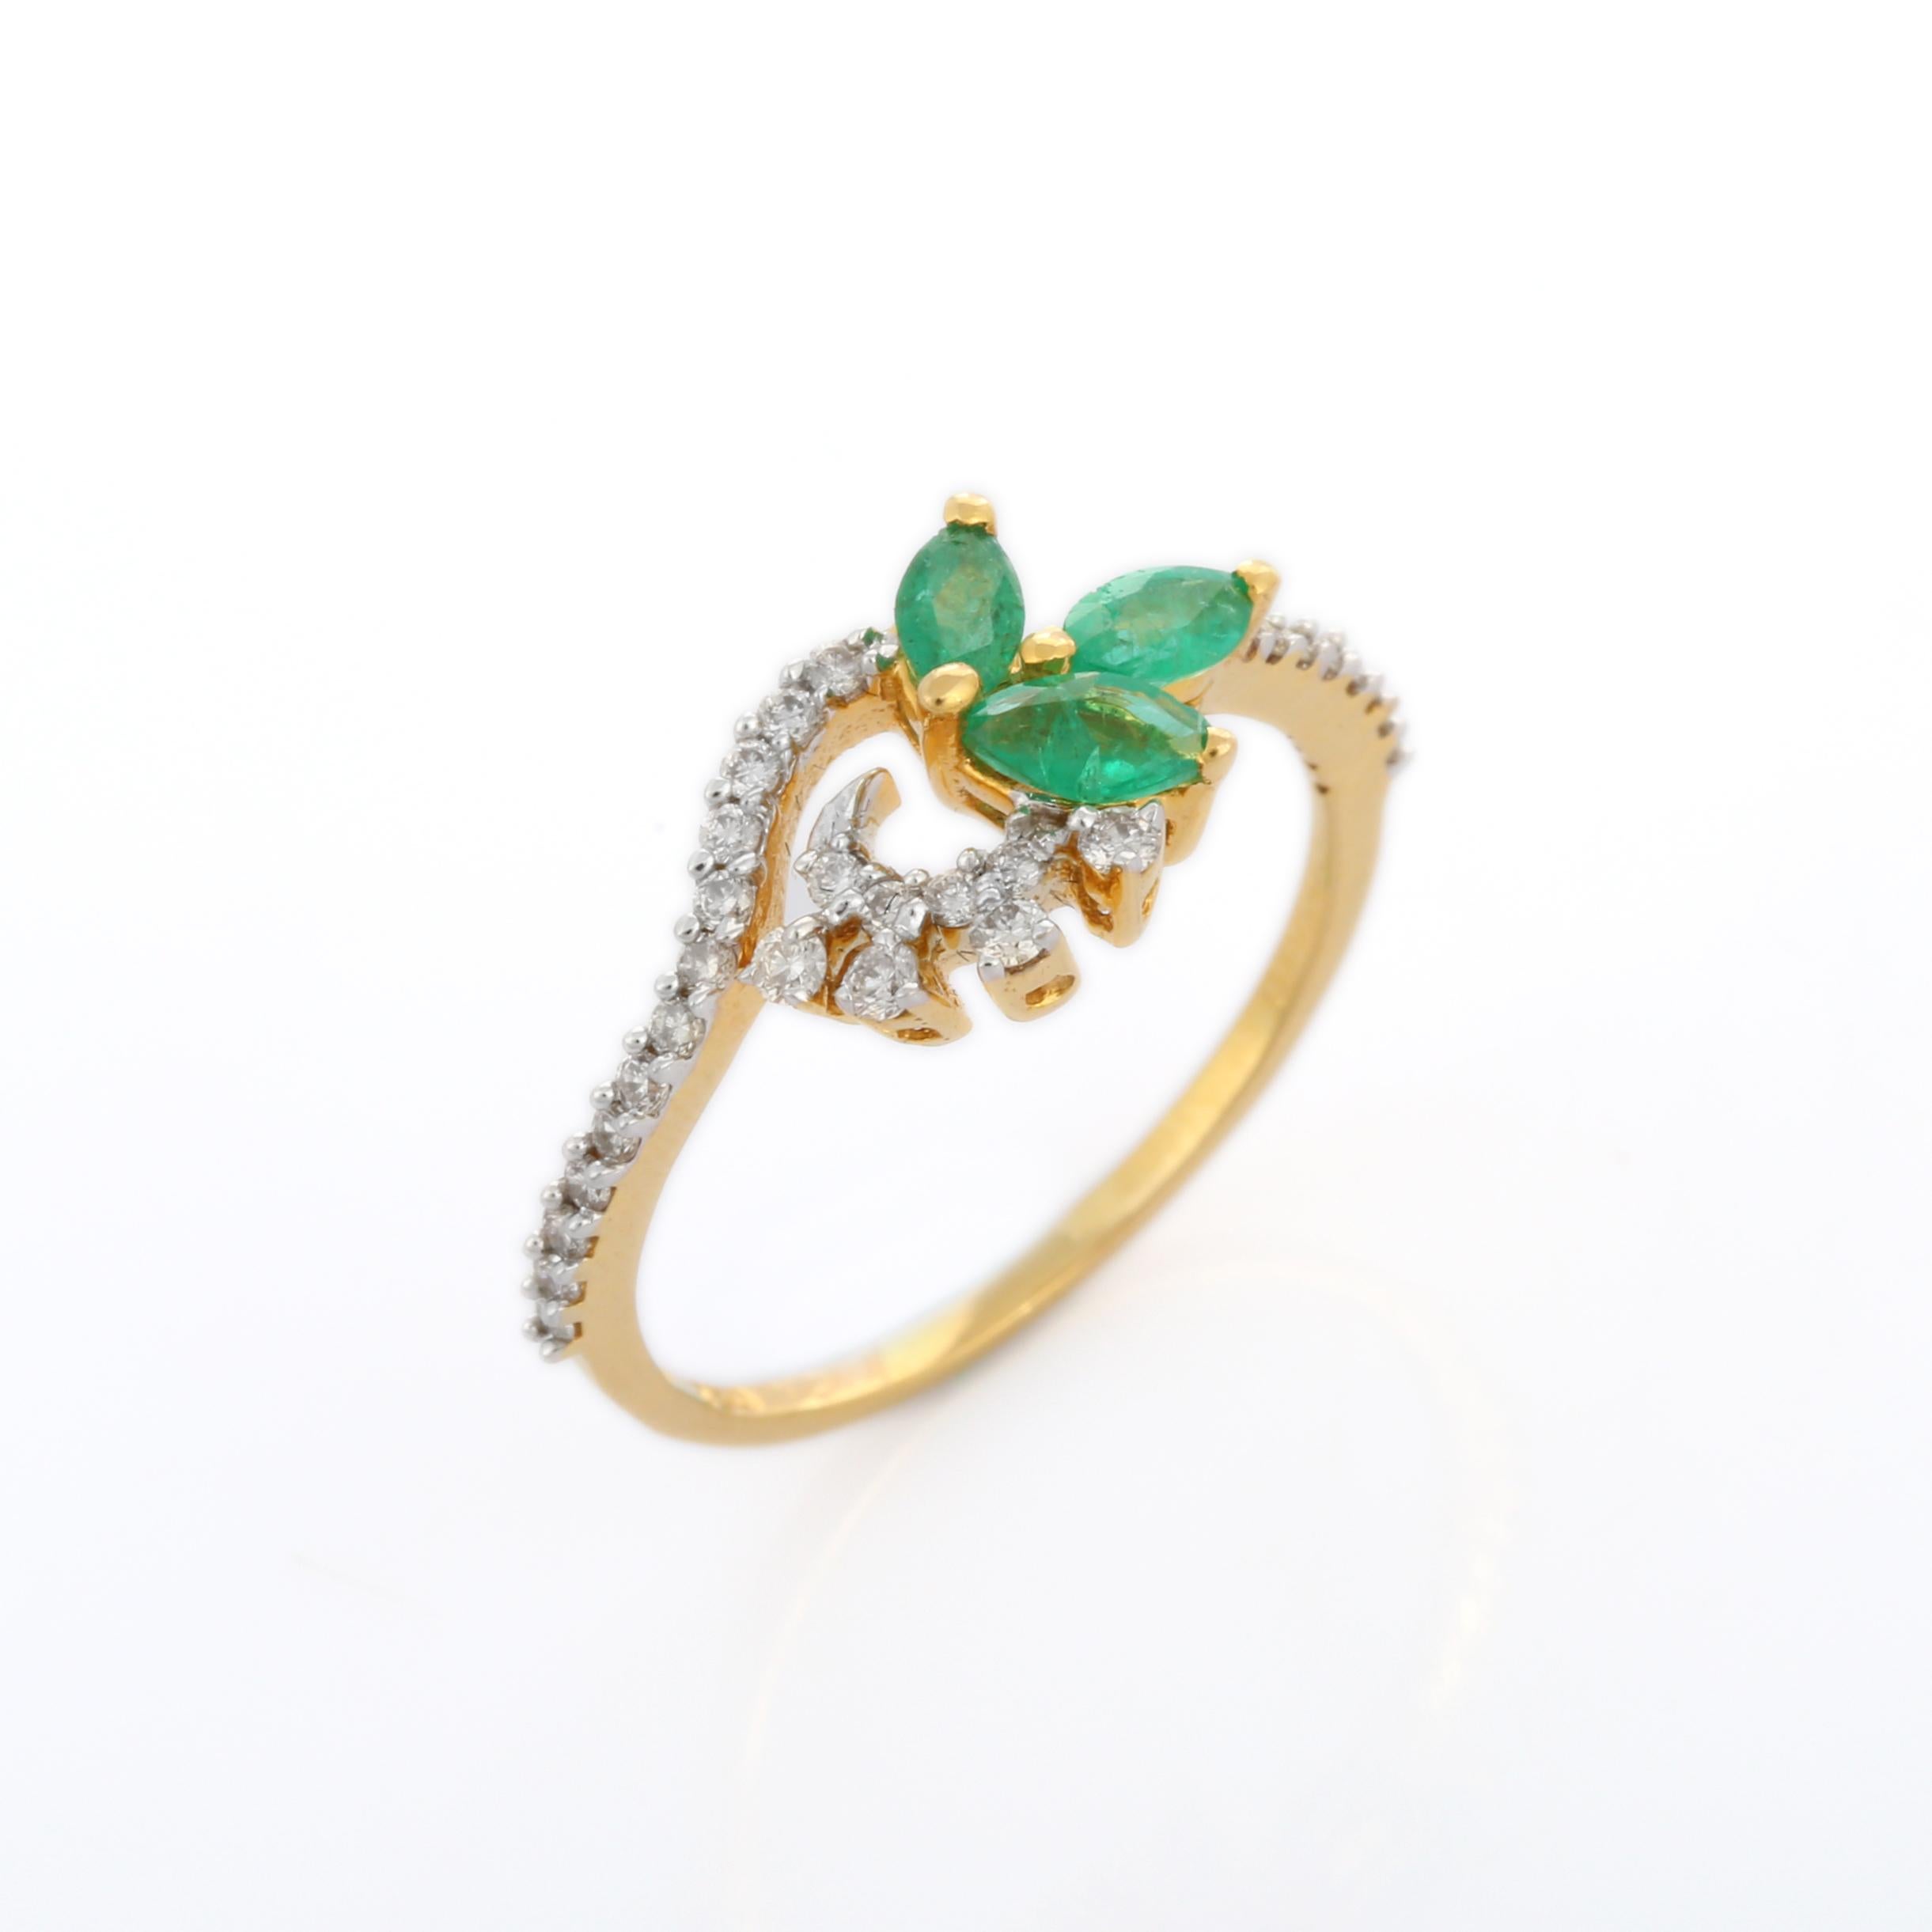 For Sale:  18K Yellow Gold Emerald Diamond Engagement Ring 5